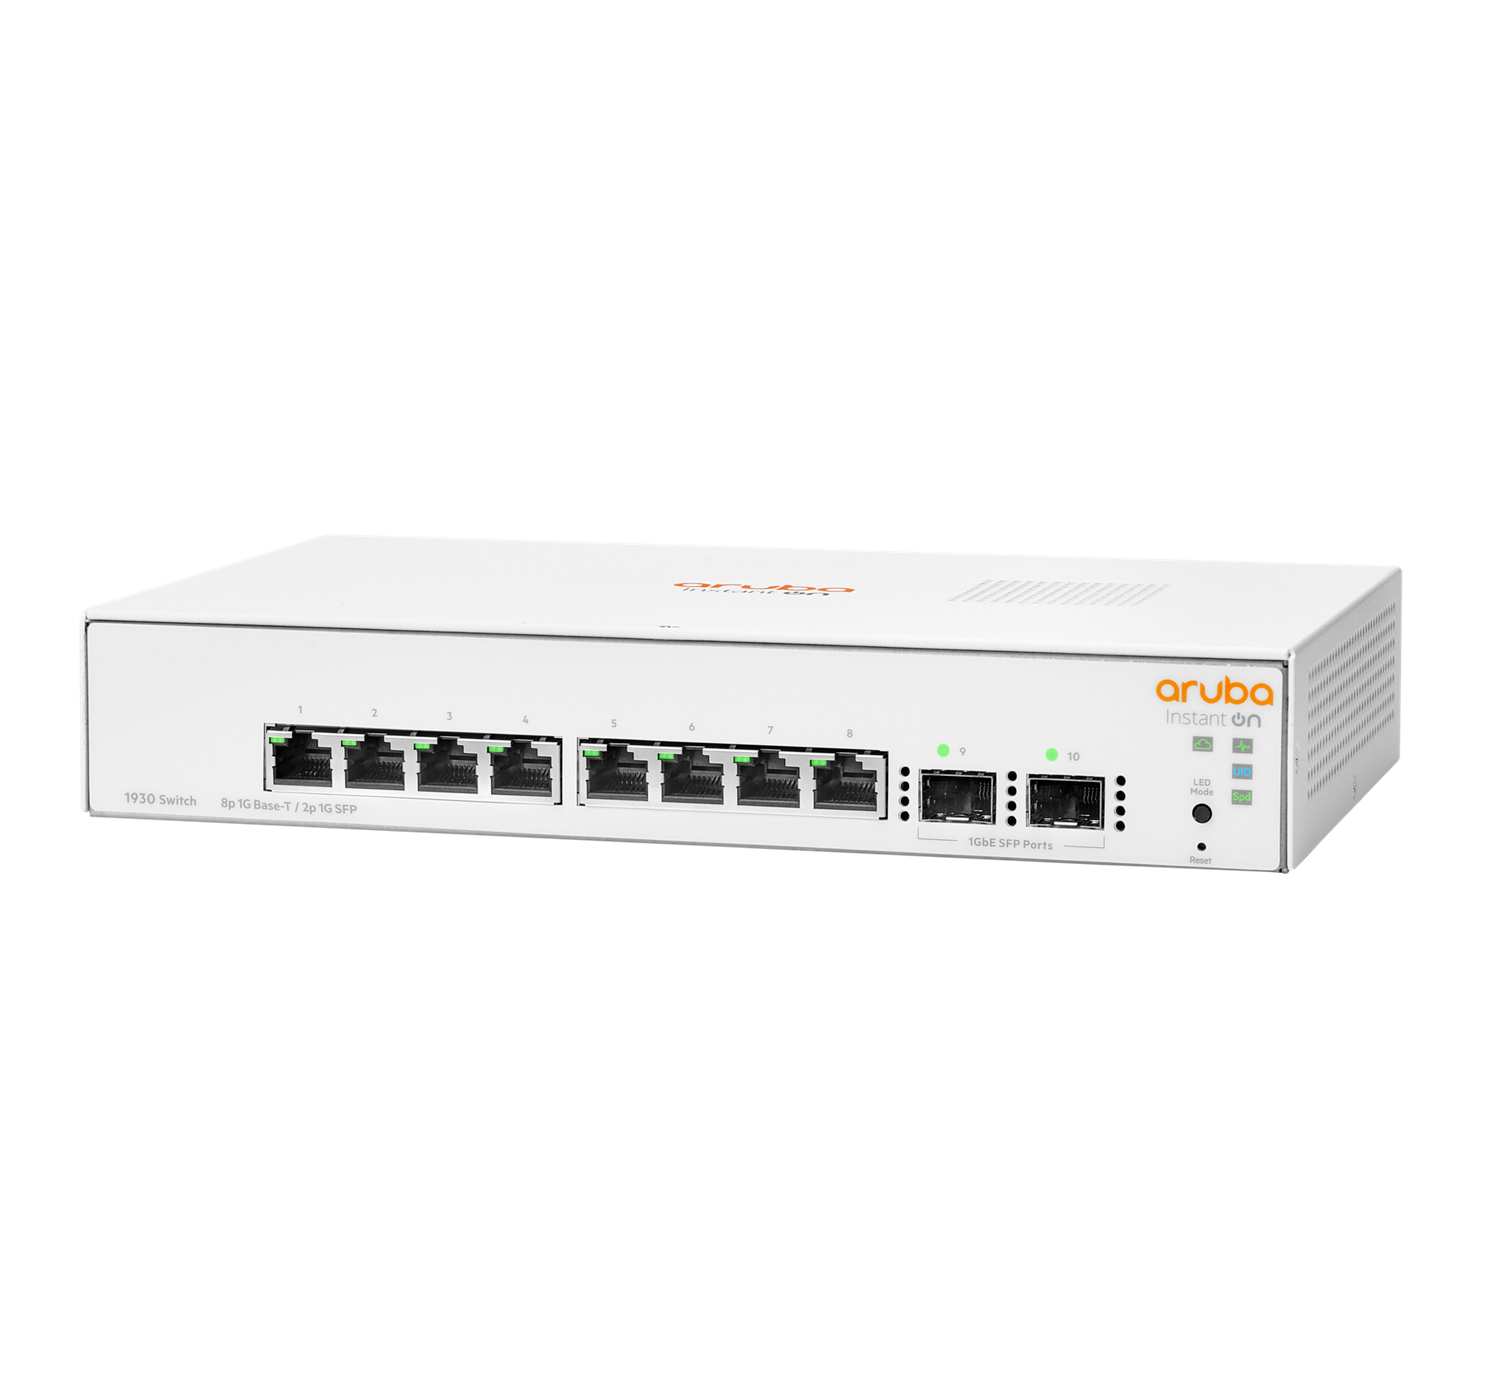 HPE Aruba Instant On 1930 8G 2SFP Switch (p/n- JL680A)